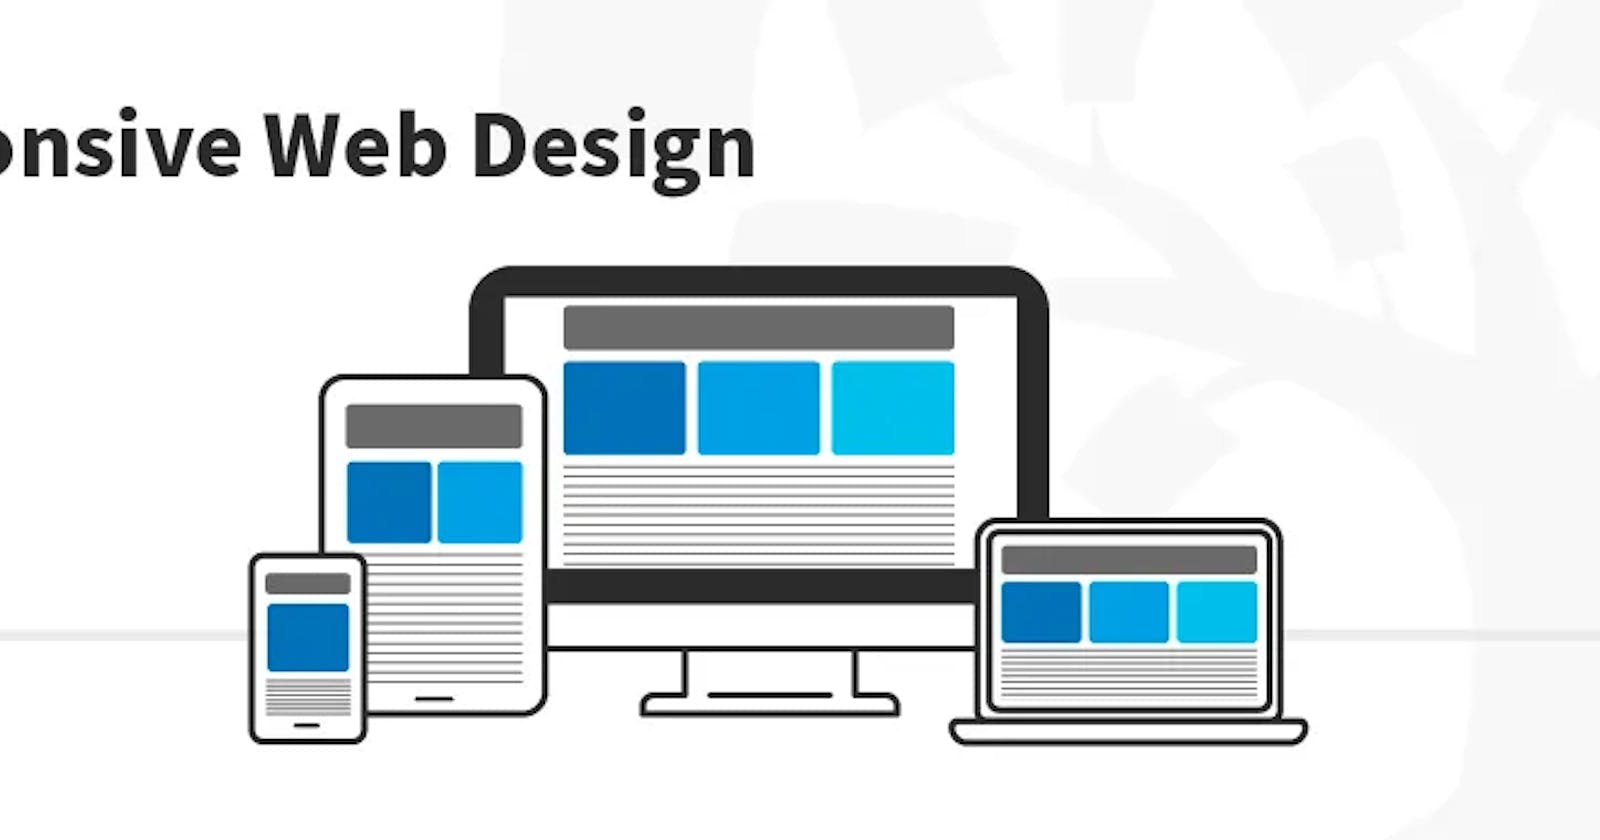 Creating a Responsive Web Design: Best Practices and Code Examples